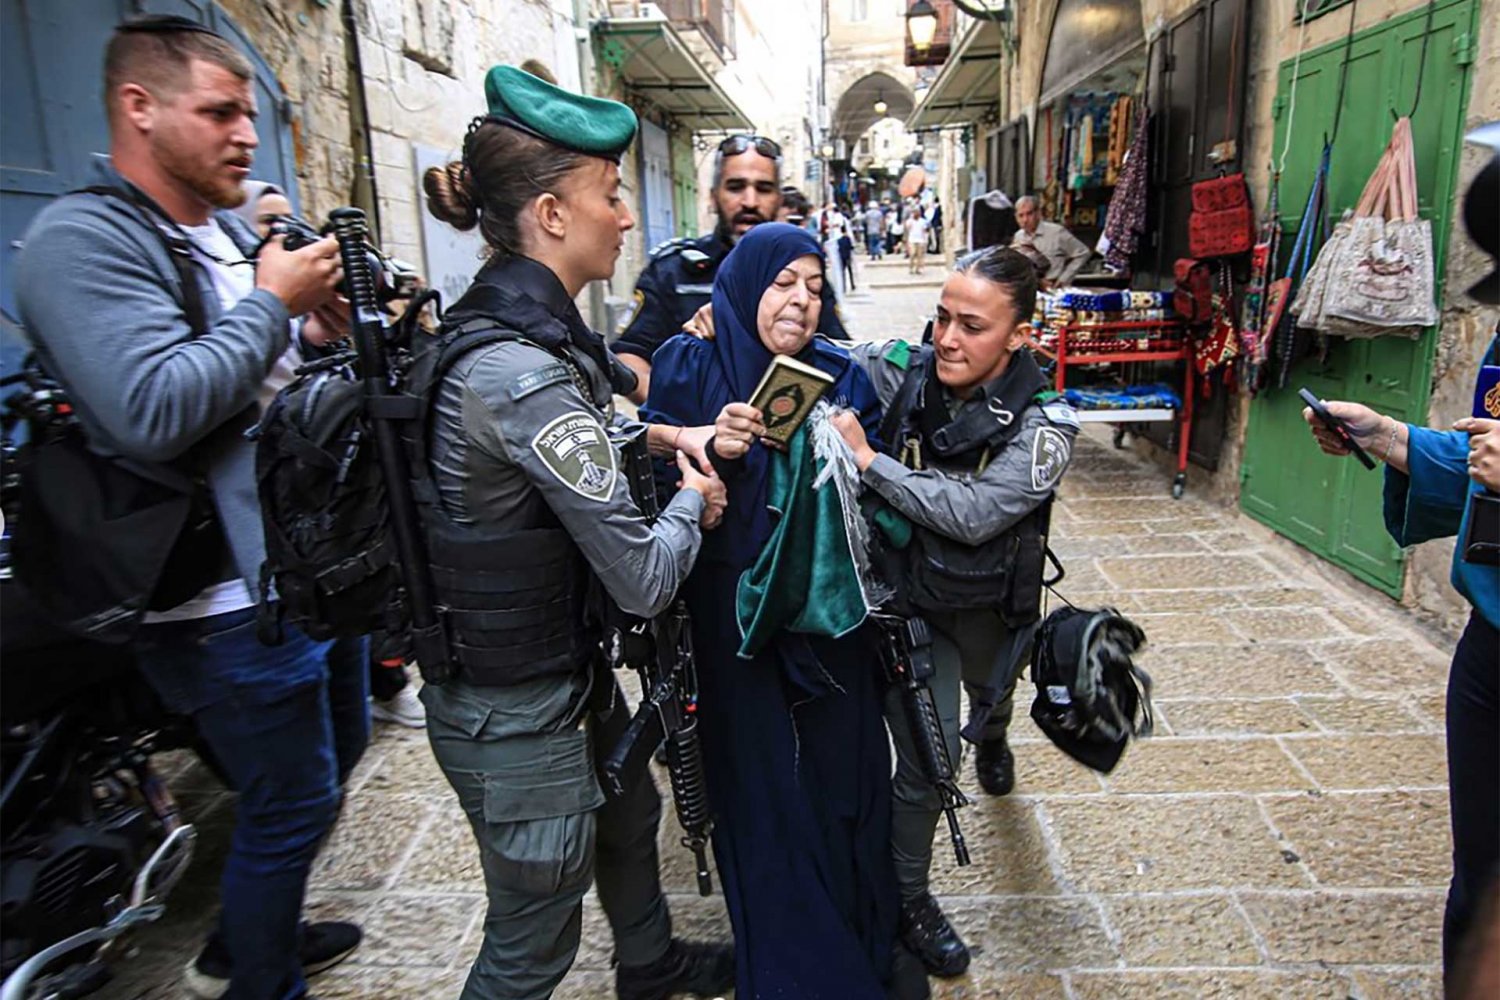 A Palestinian woman with a Quran in her hand is arrested by Israeli officers in East Jerusalem in October 2023.